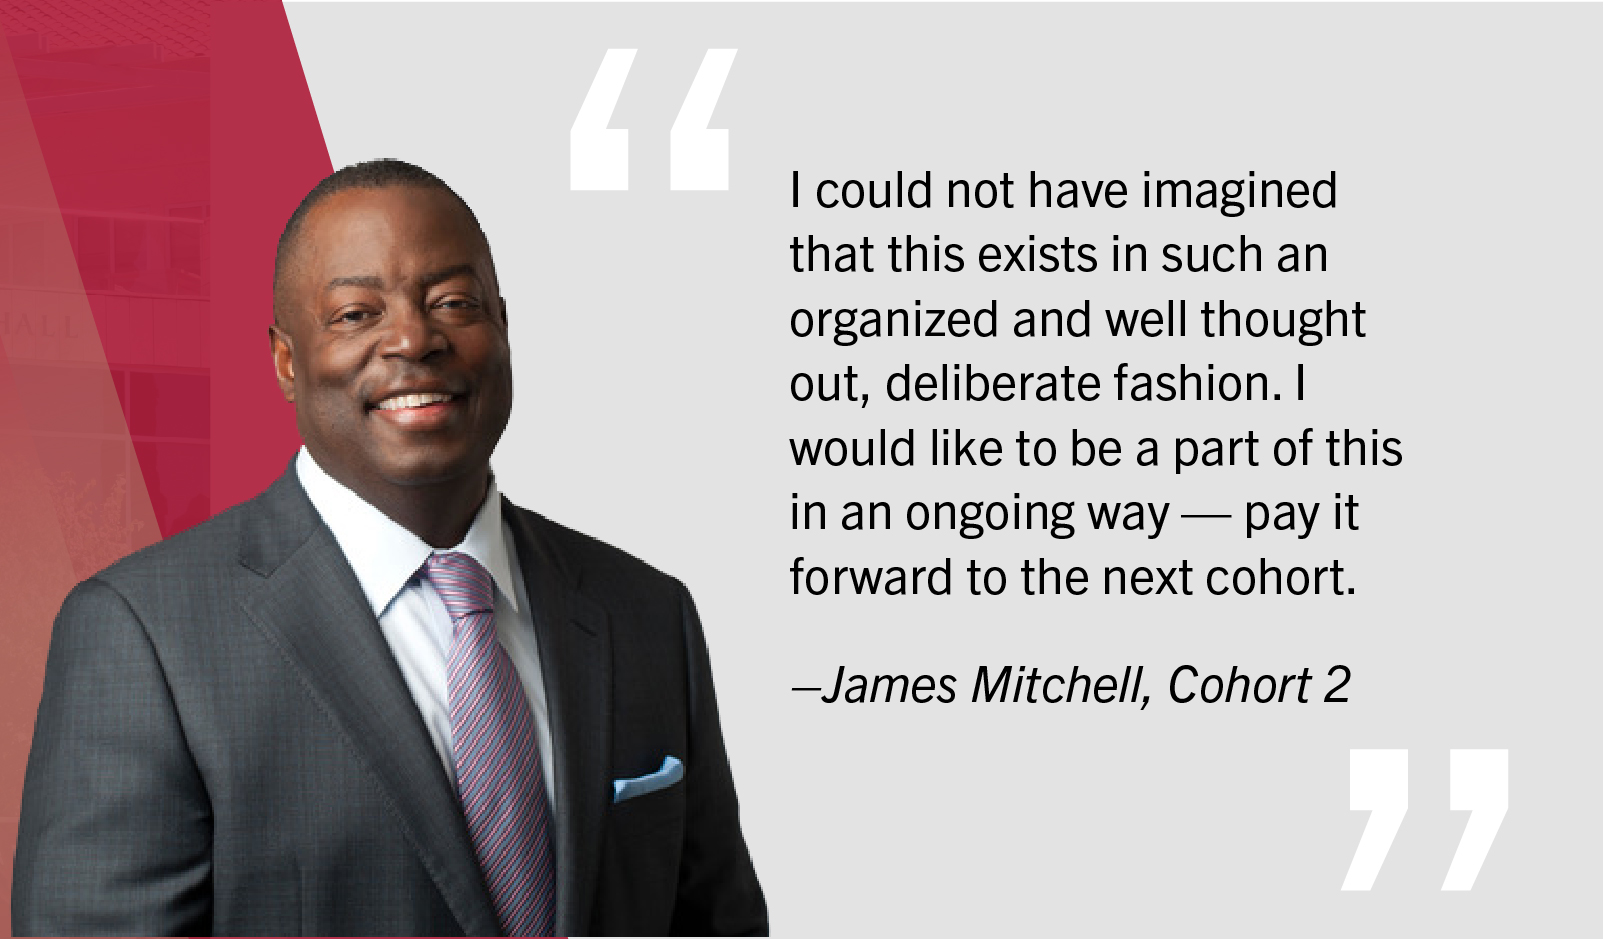 Quote by James Mitchell, Cohort 2